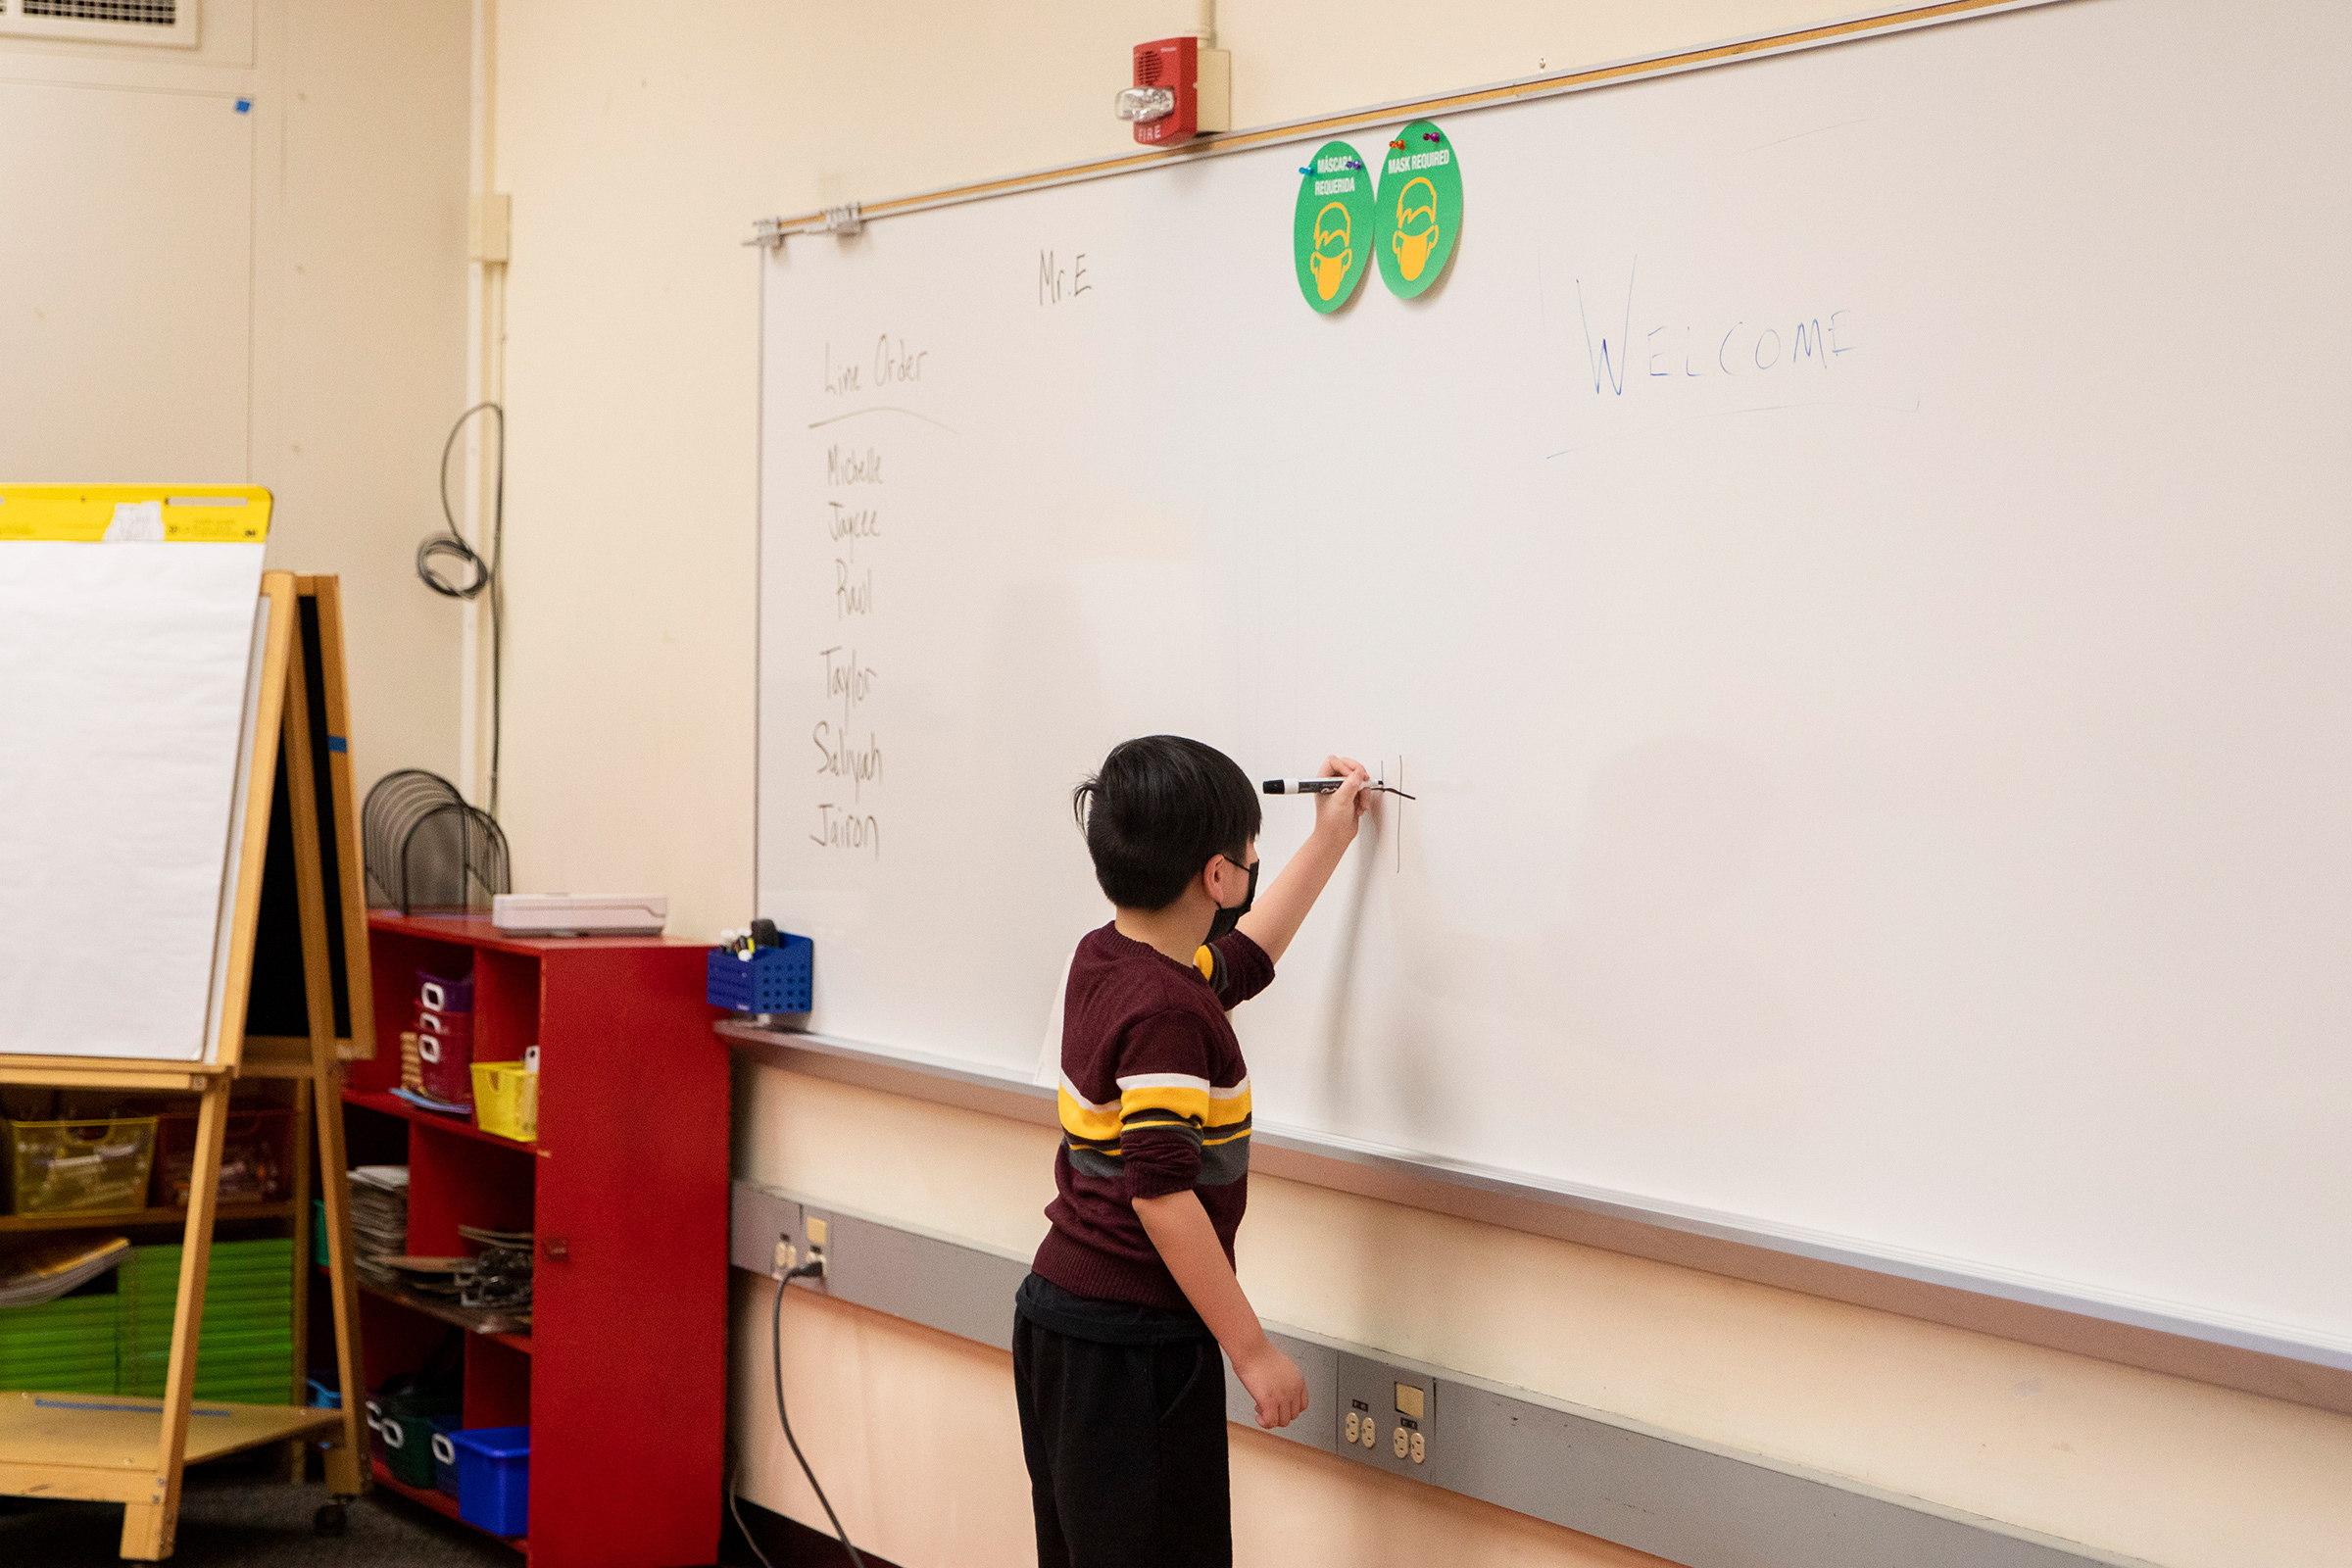 A second-grade student works on a math problem on the board at an elementary school in California. (Brianna Soukup—Portland Press Herald/Getty Images)